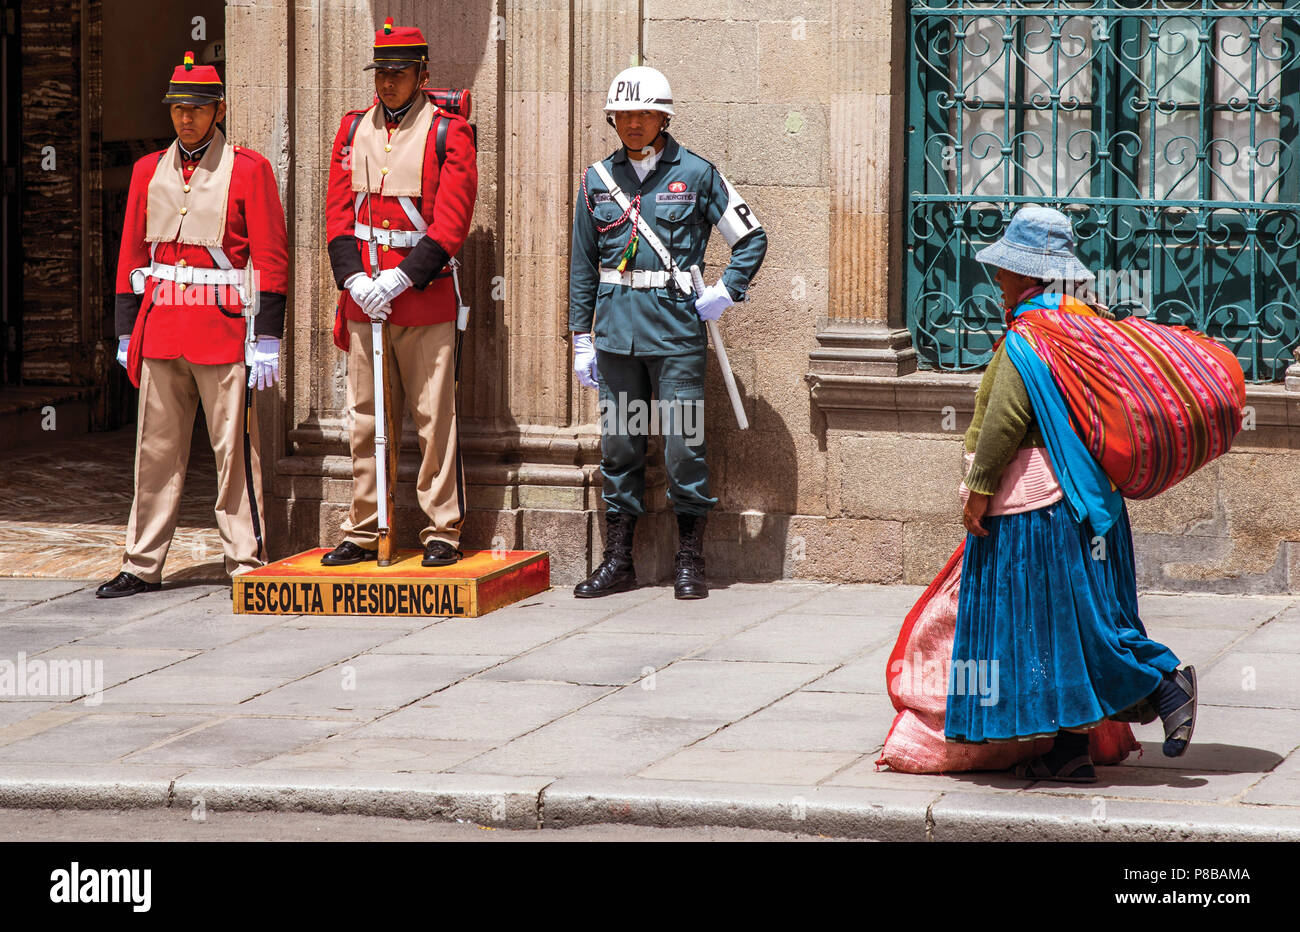 Soldiers guarding the Presidential Palace, Plaza Murillo, La Paz, Bolivia, as Quechua woman walks past Stock Photo